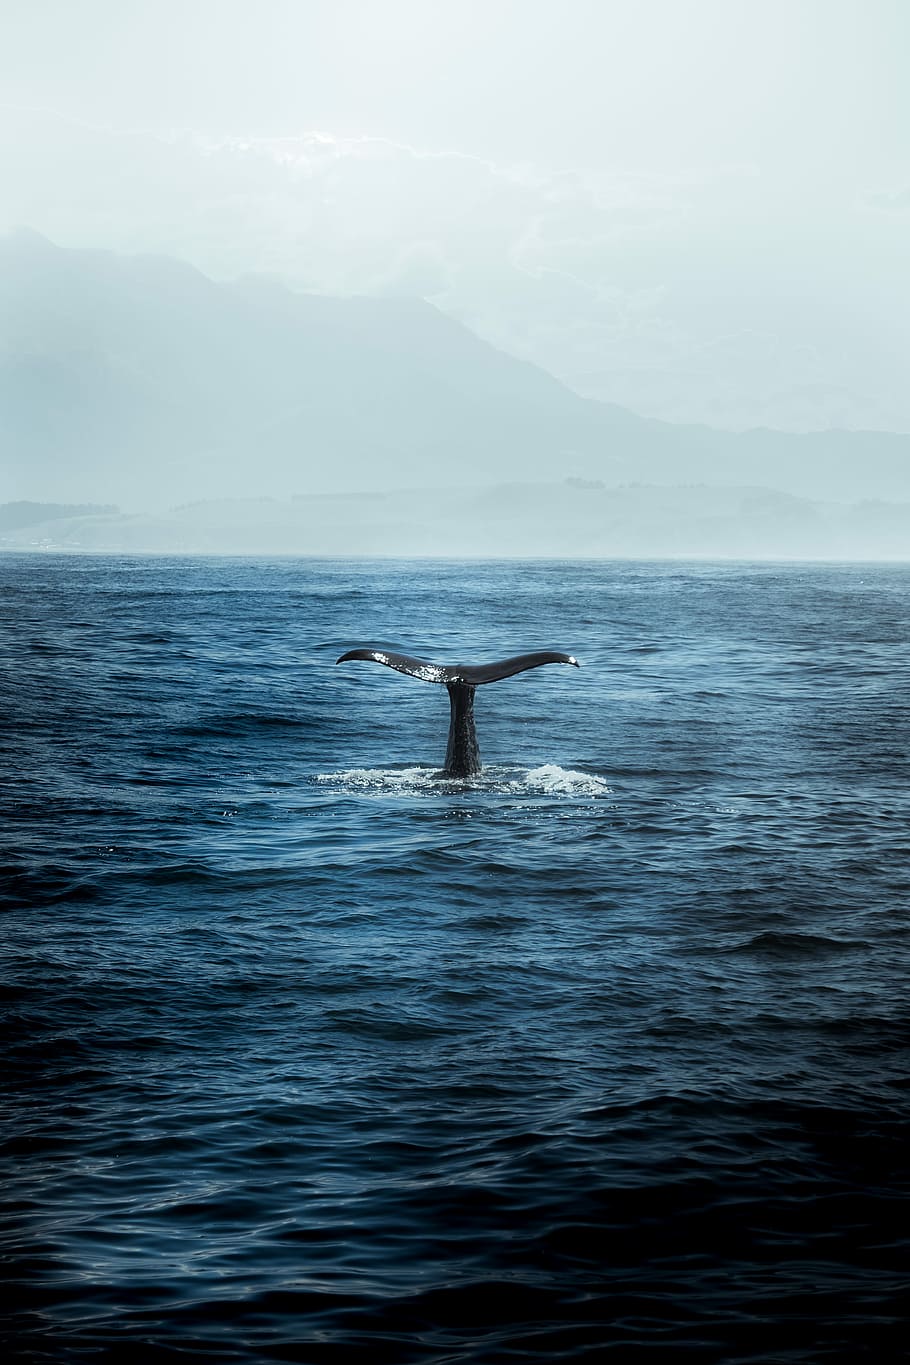 blue whale in body of water, whale tale popping out of water at daytime, HD wallpaper